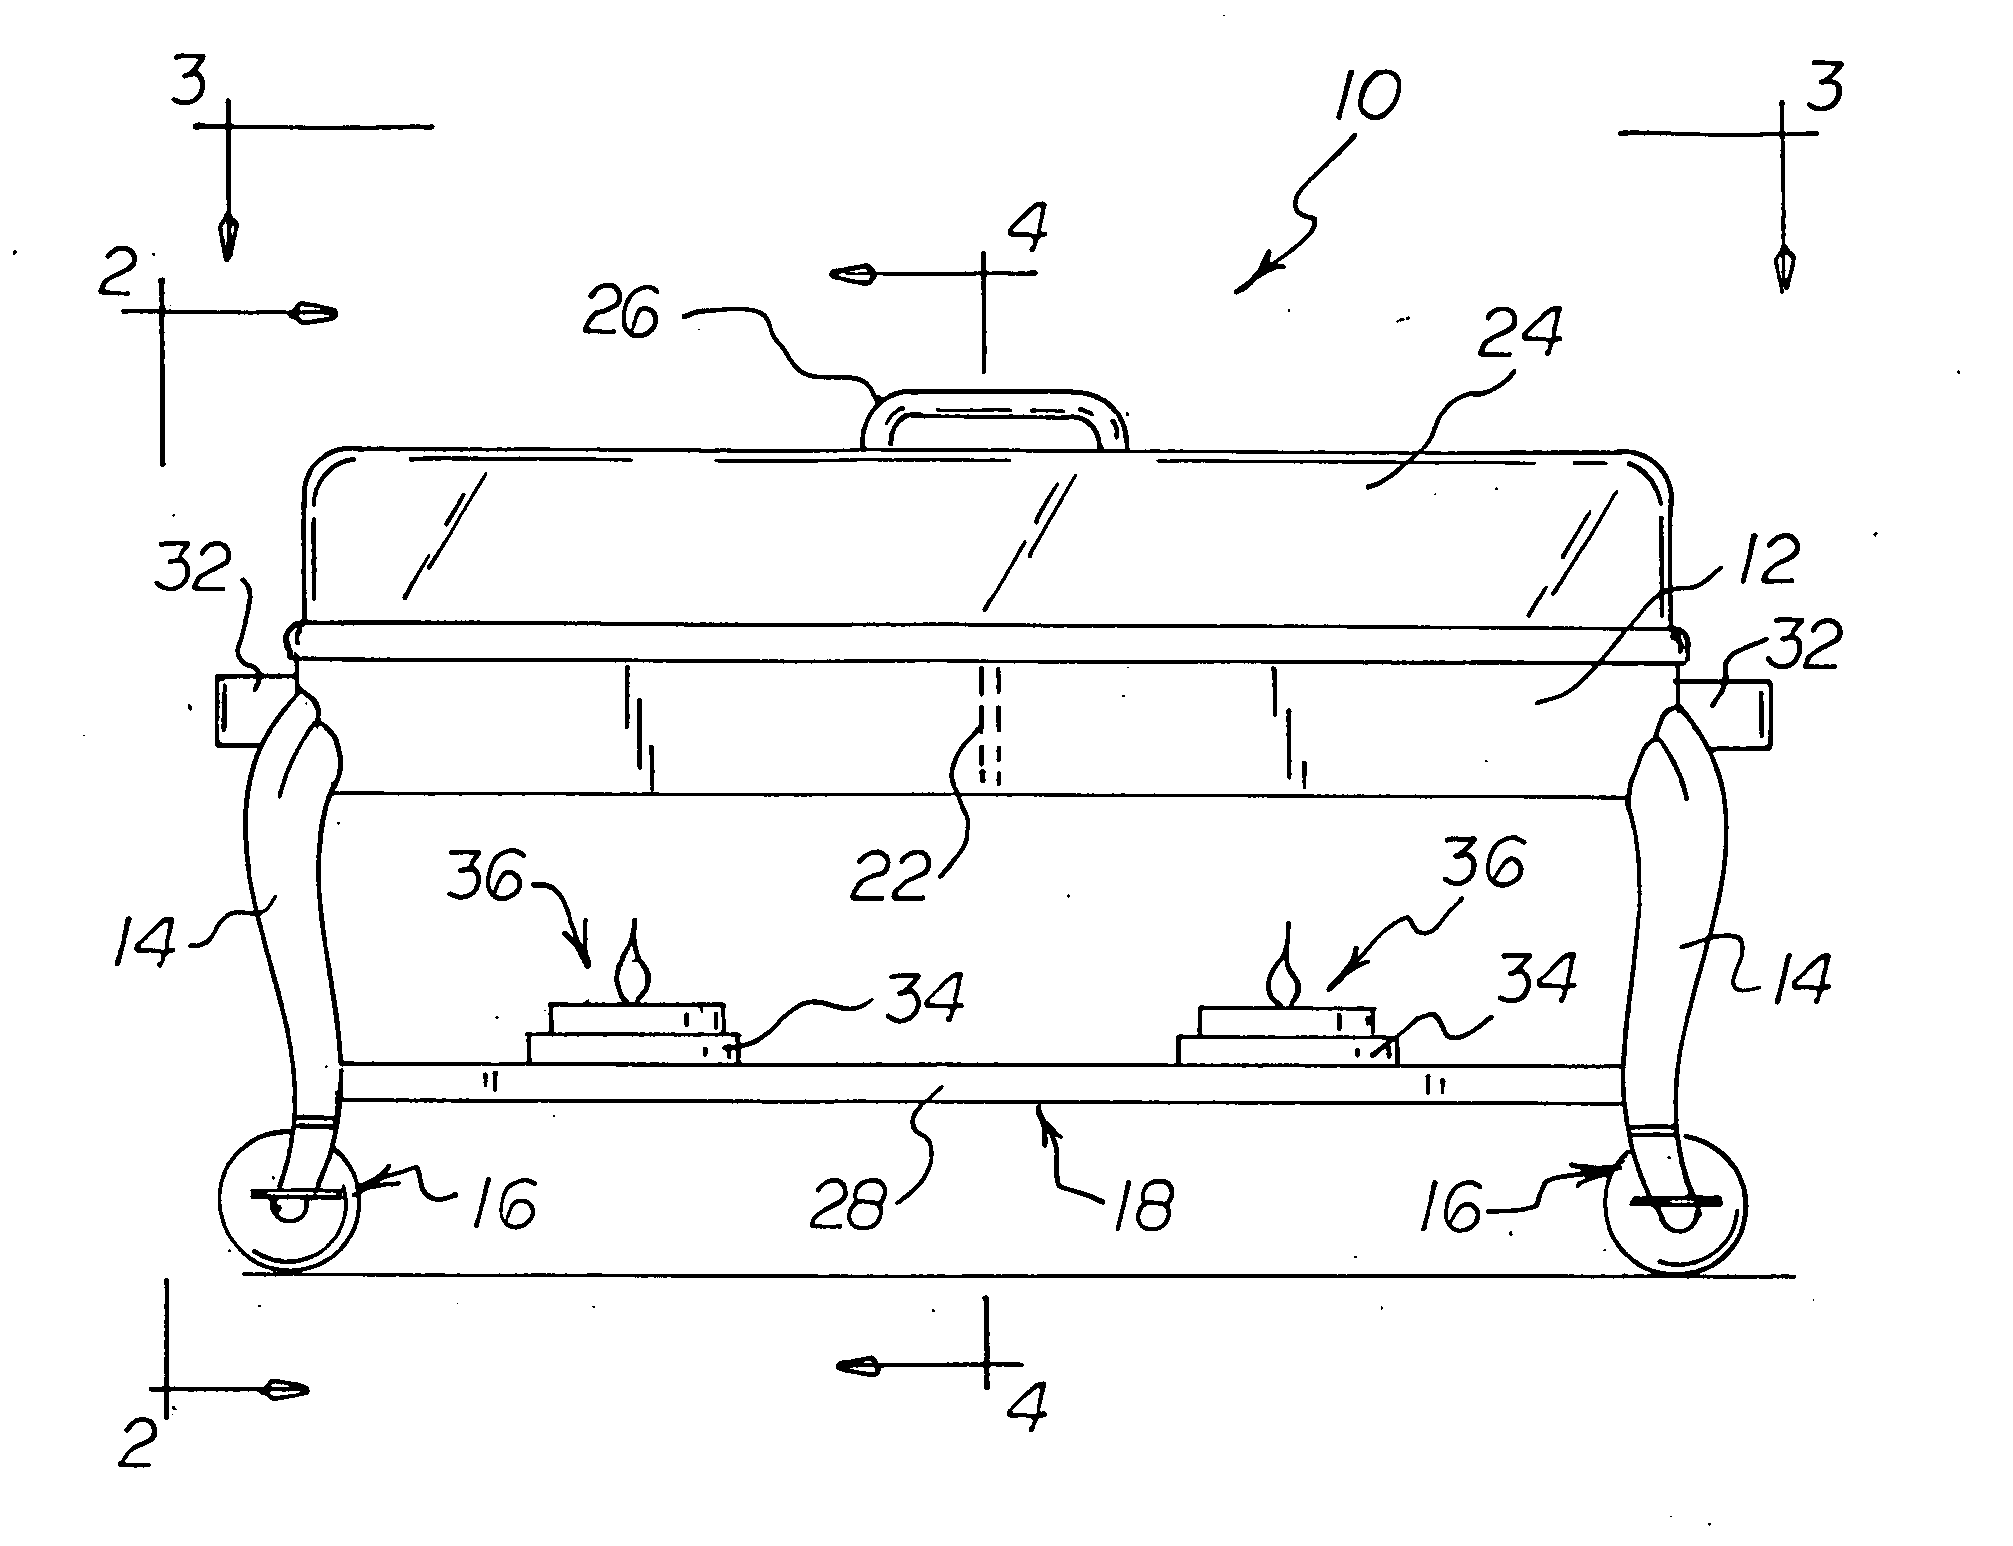 Mobile chafing dish apparatus